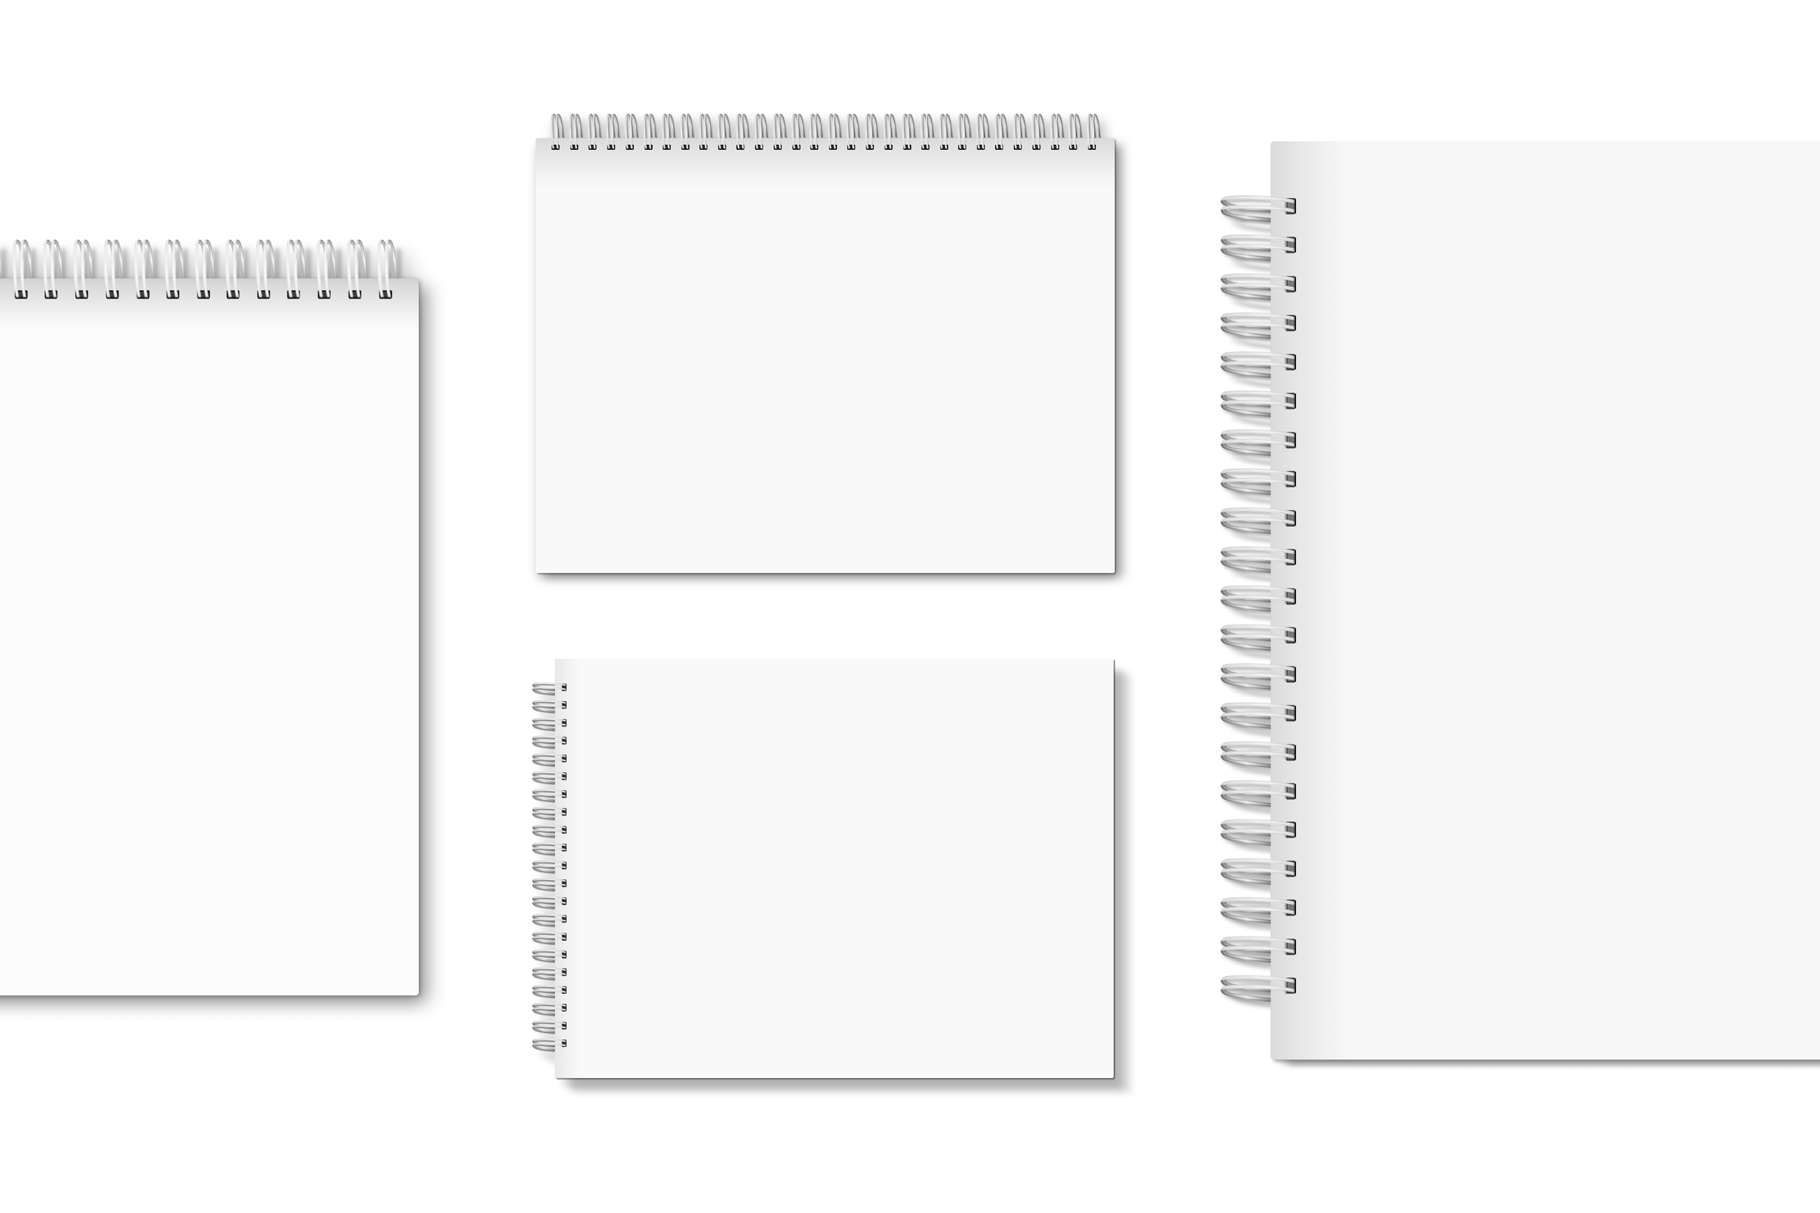 ealistic Mockup for Varied Spiral-Bound Products